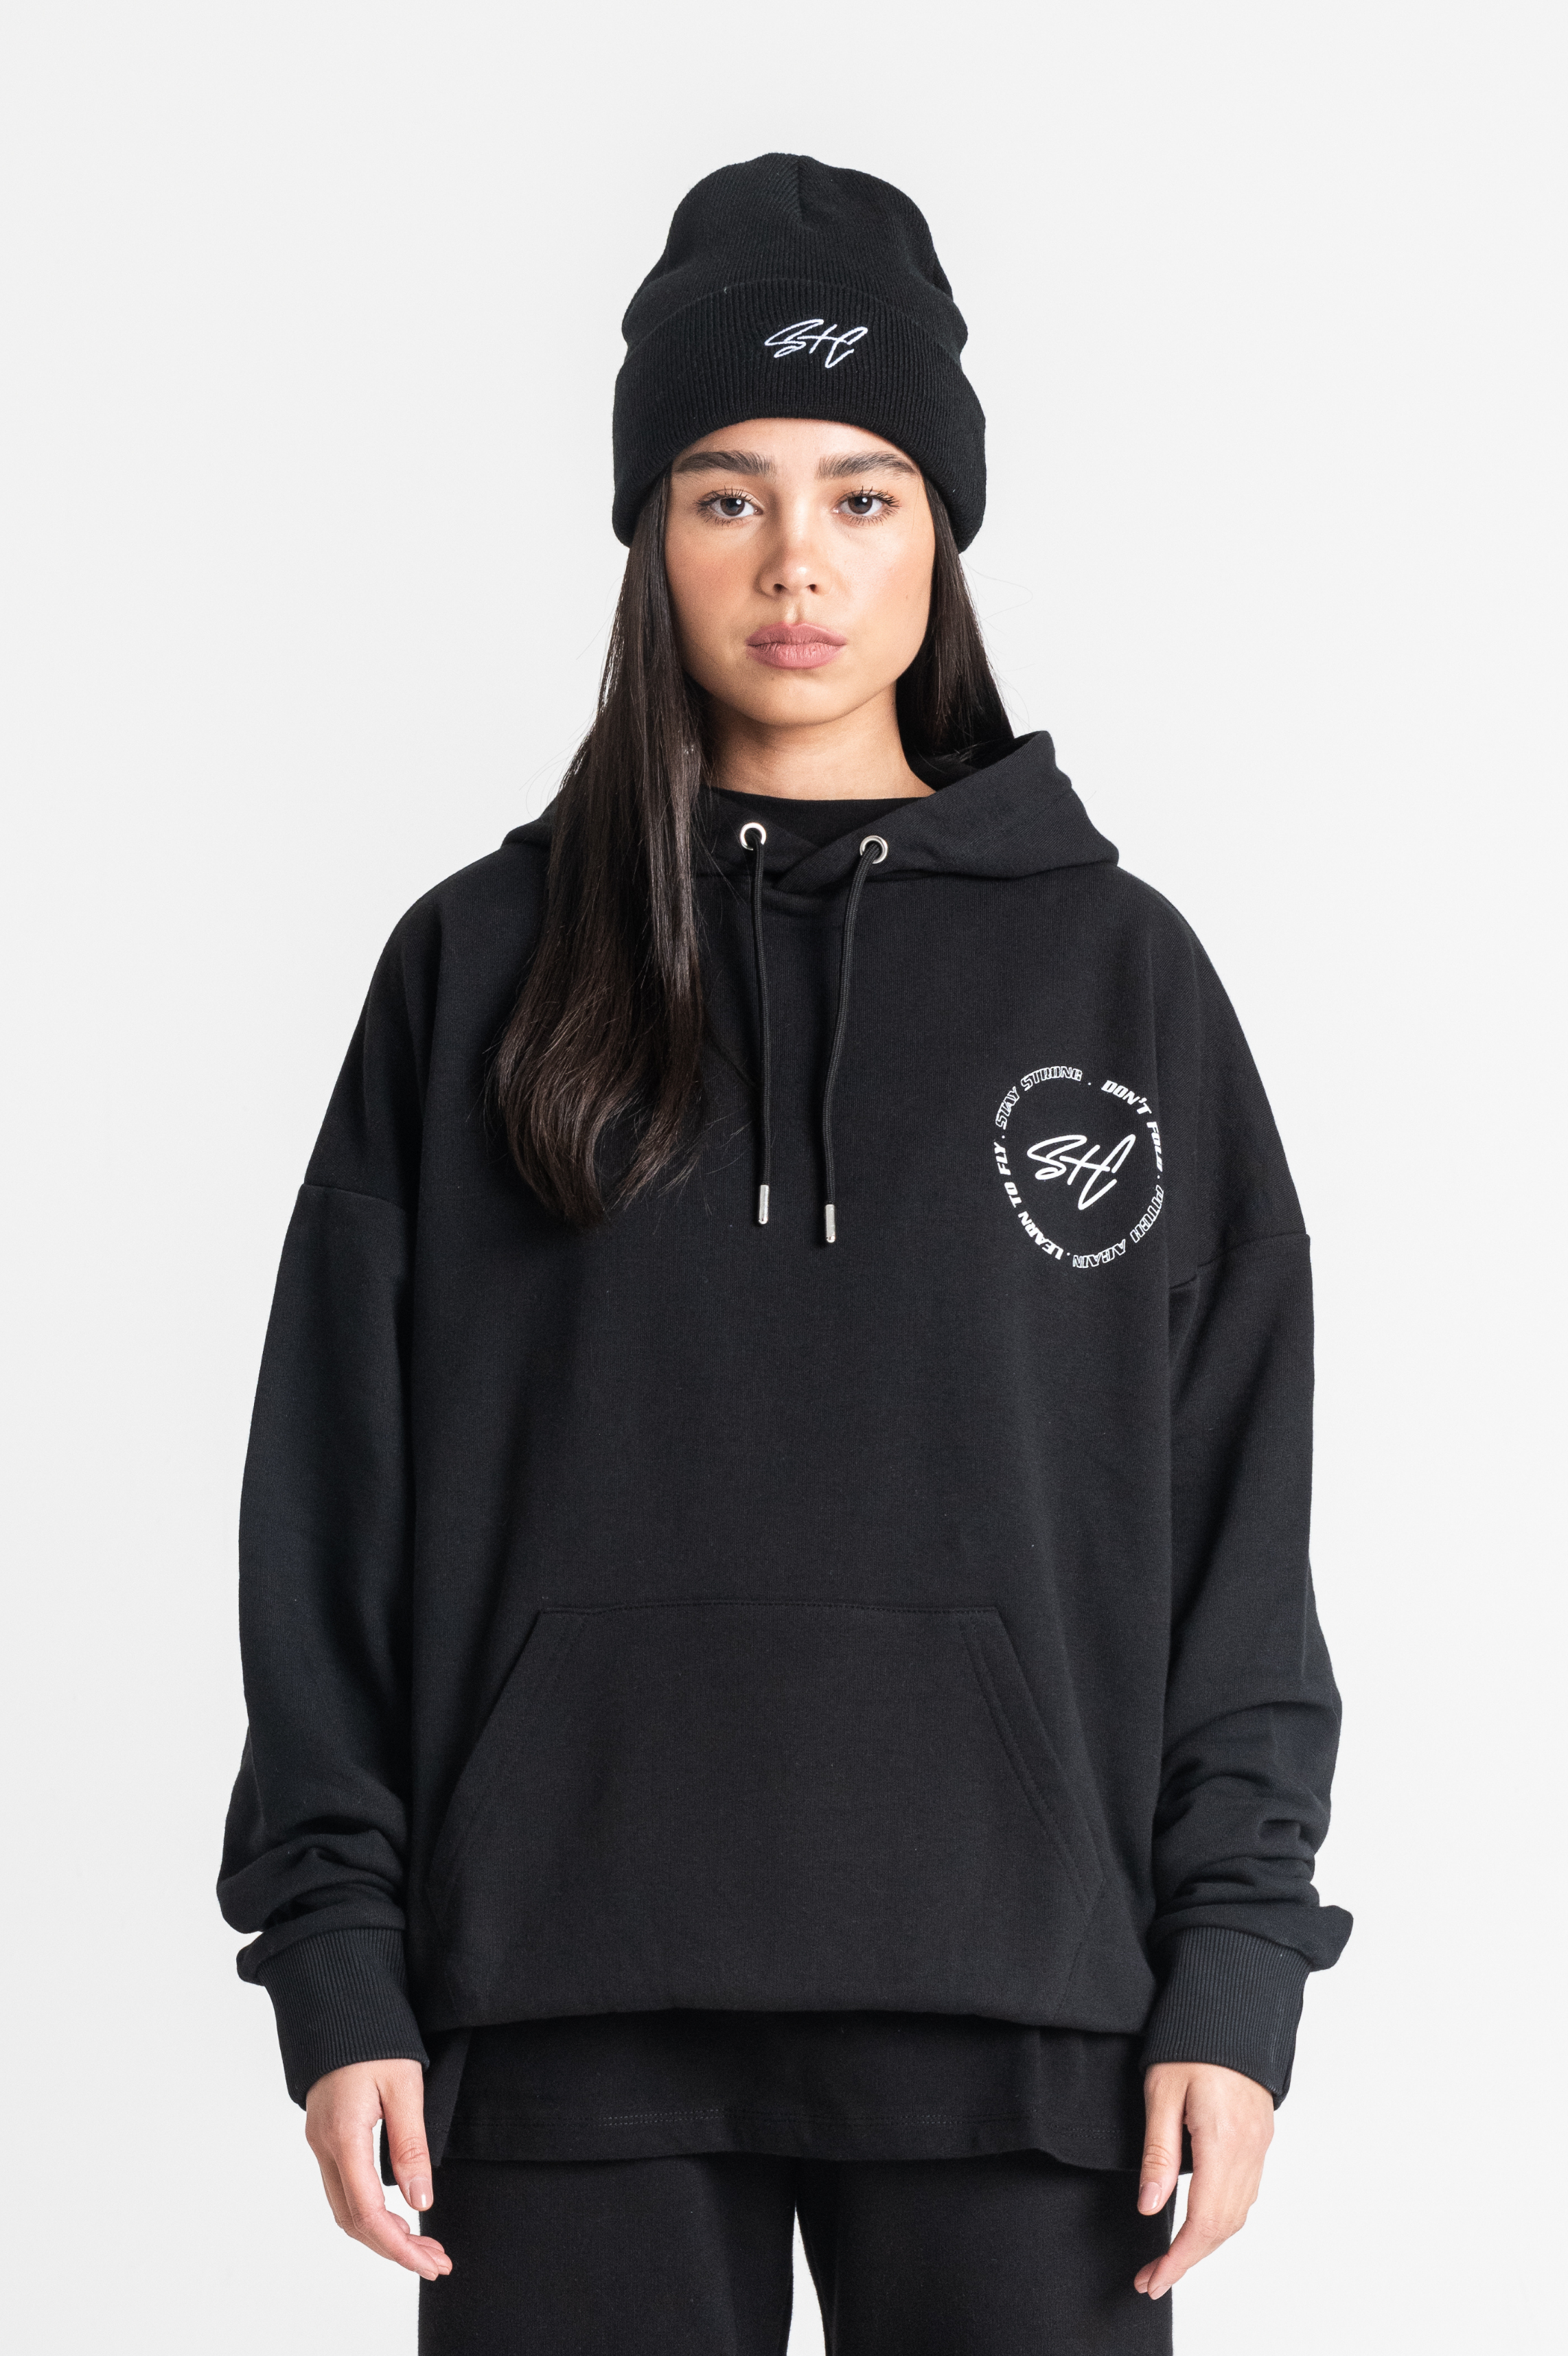 Follow Your Dreams Black Oversized Hoodie (Heavyweight) – Lazy Hippos